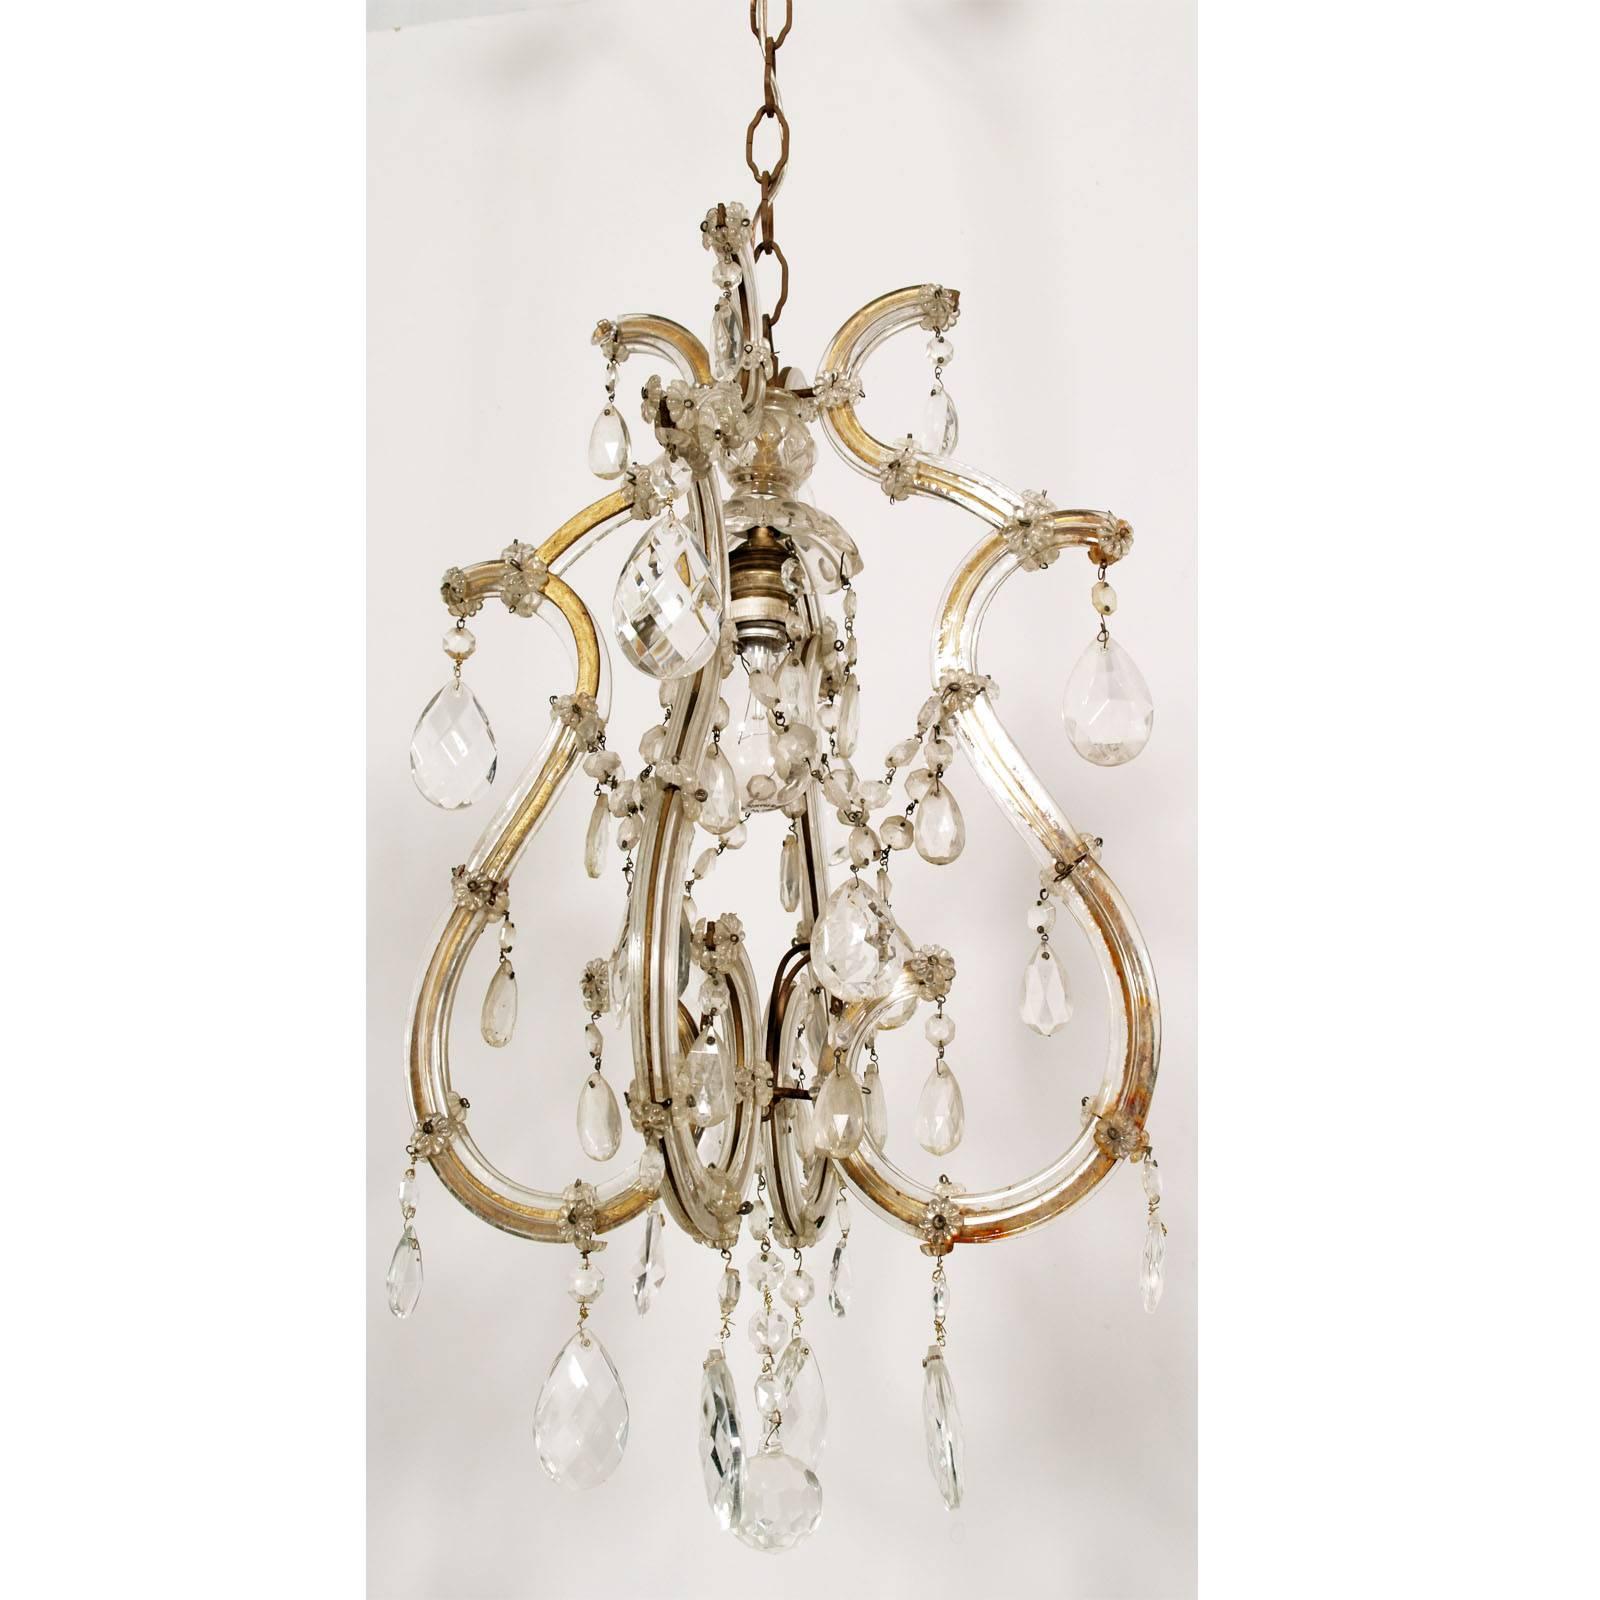 Art Nouveau 1910s Murano Maria Teresa Chandelier by Salviati with Restored Electrical System